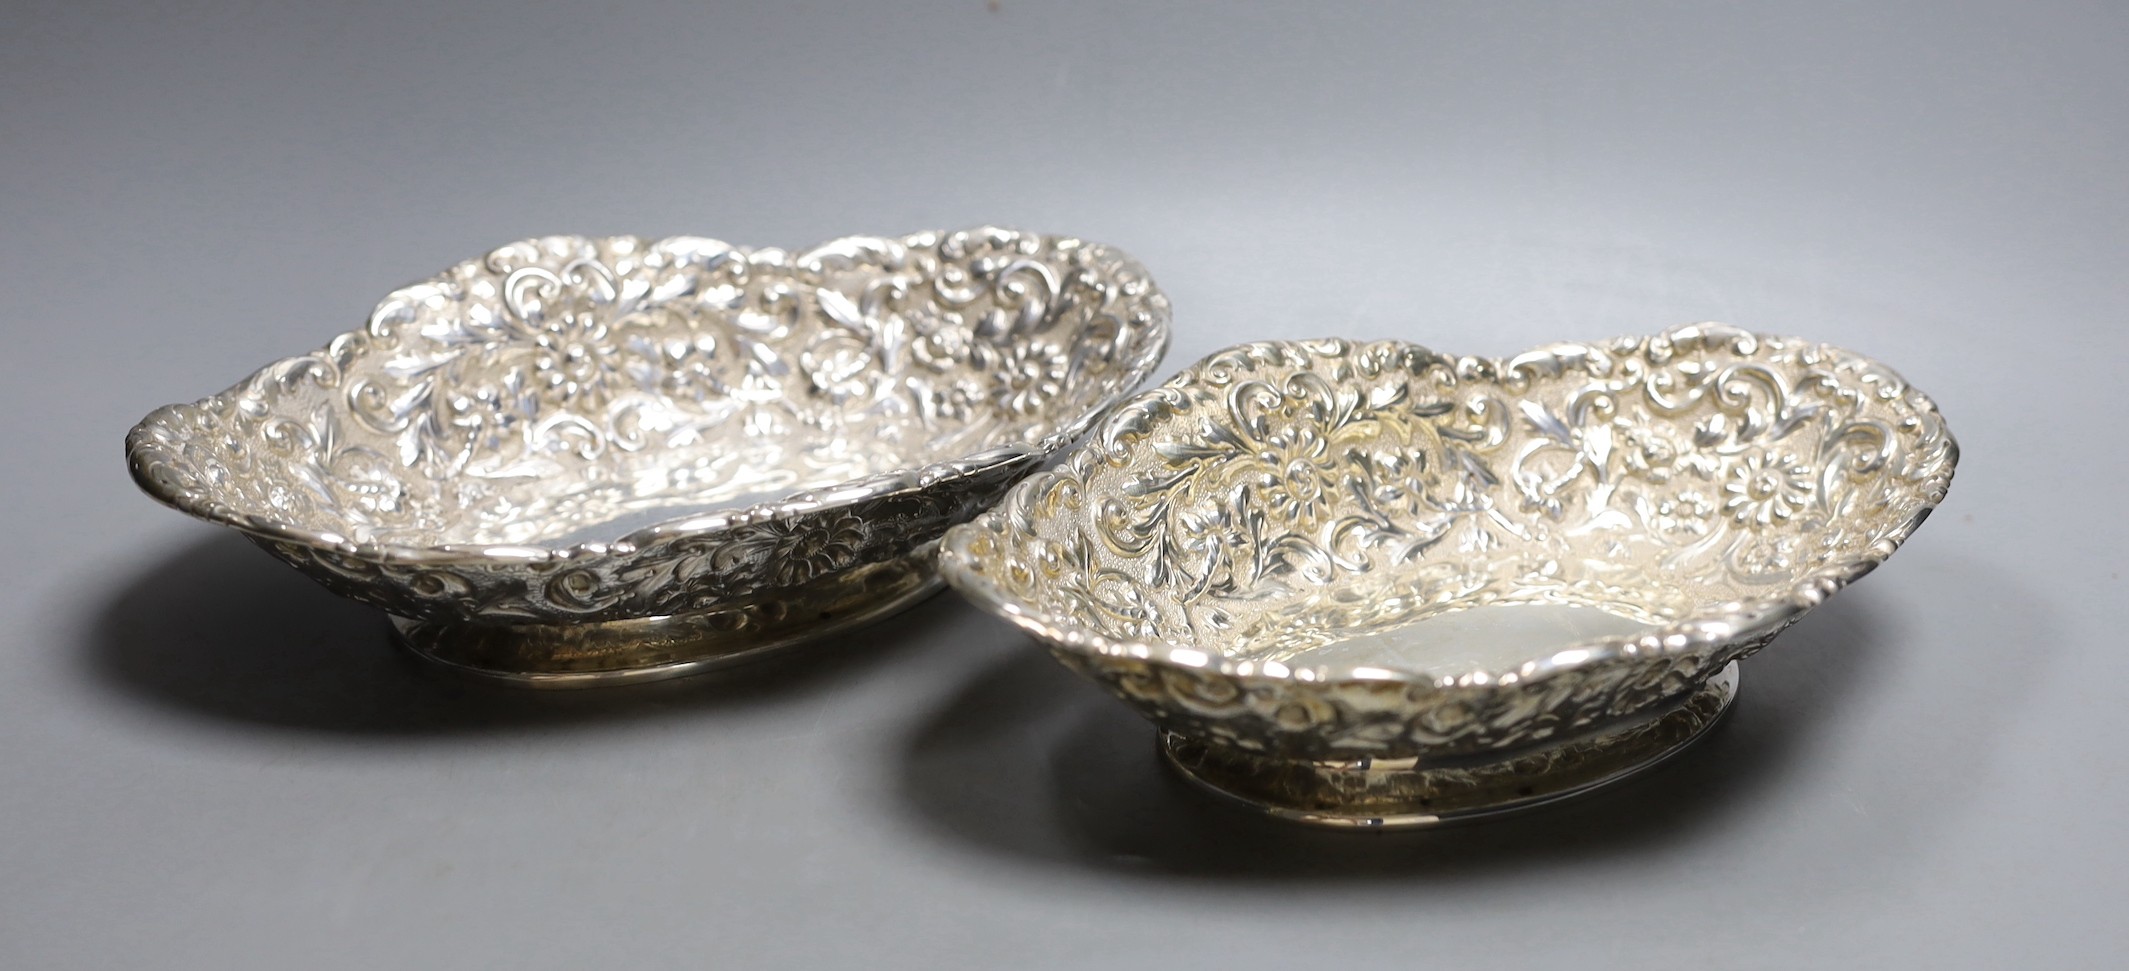 A pair of late Victorian Scottish repousse silver oval dishes, Hamilton & Inches, Edinburgh, 1900, 25cm, 17oz.